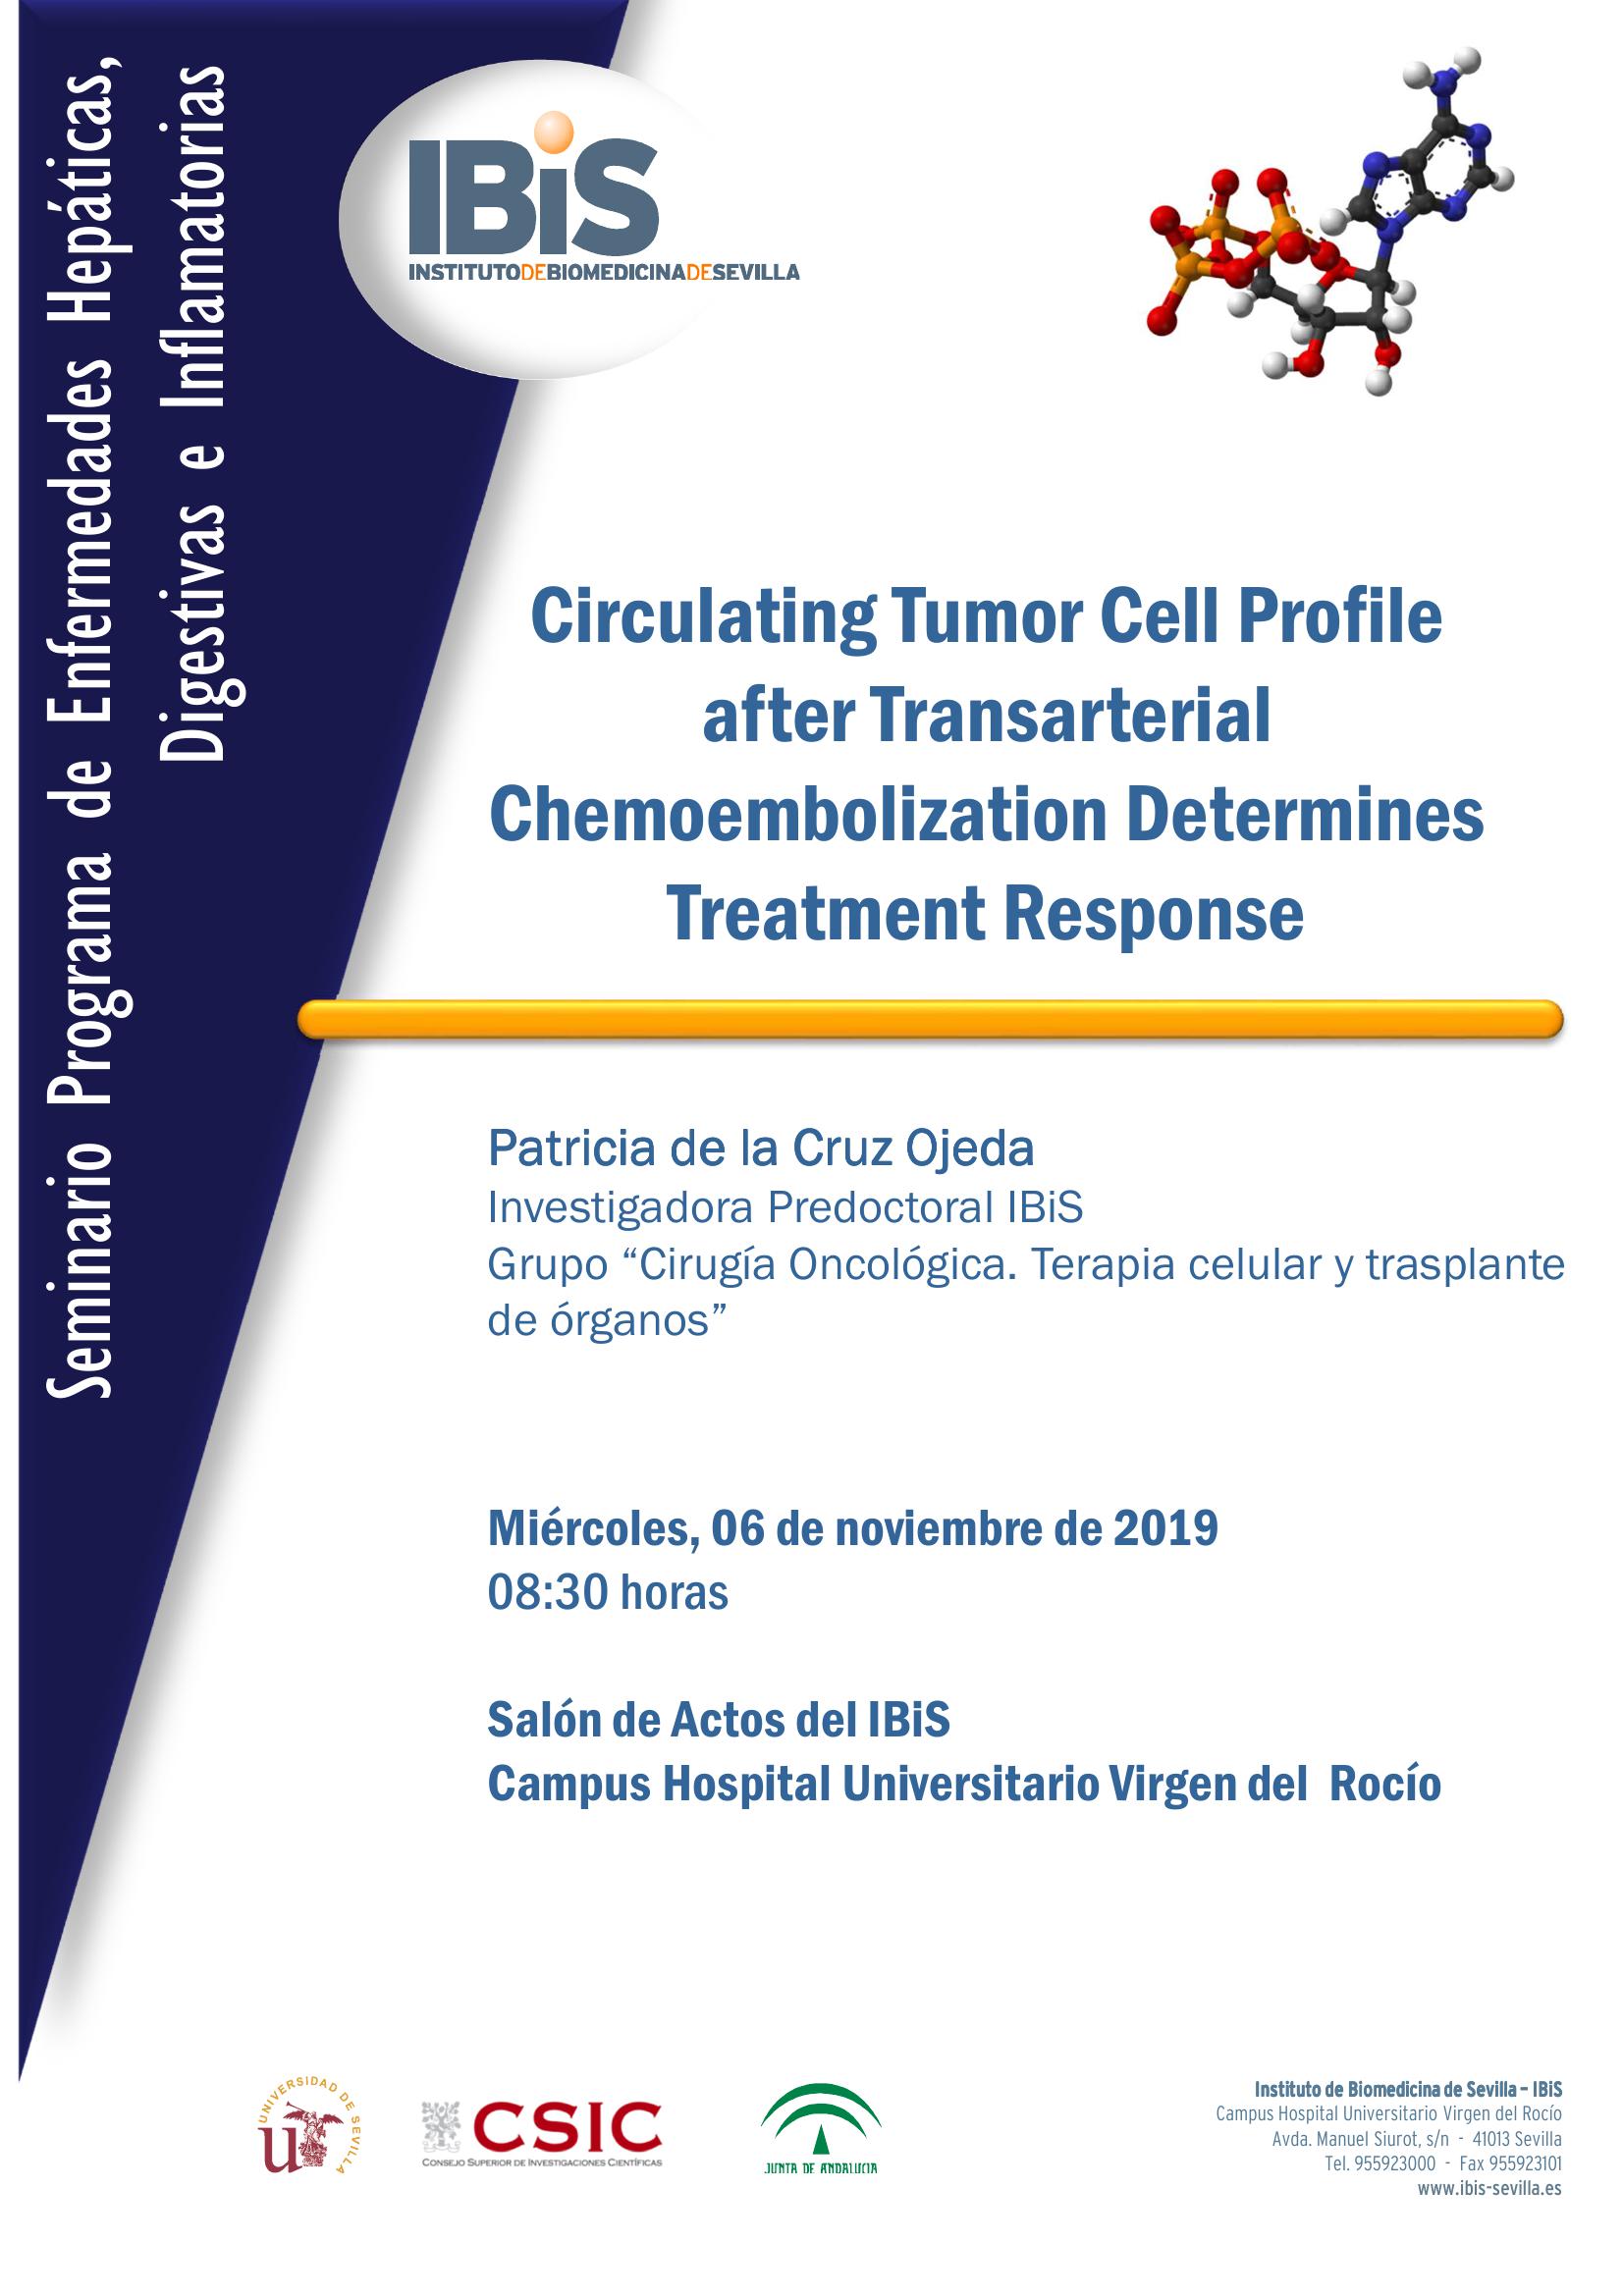 Poster: Circulating Tumor Cell Profile after Transarterial Chemoembolization Determines Treatment Response